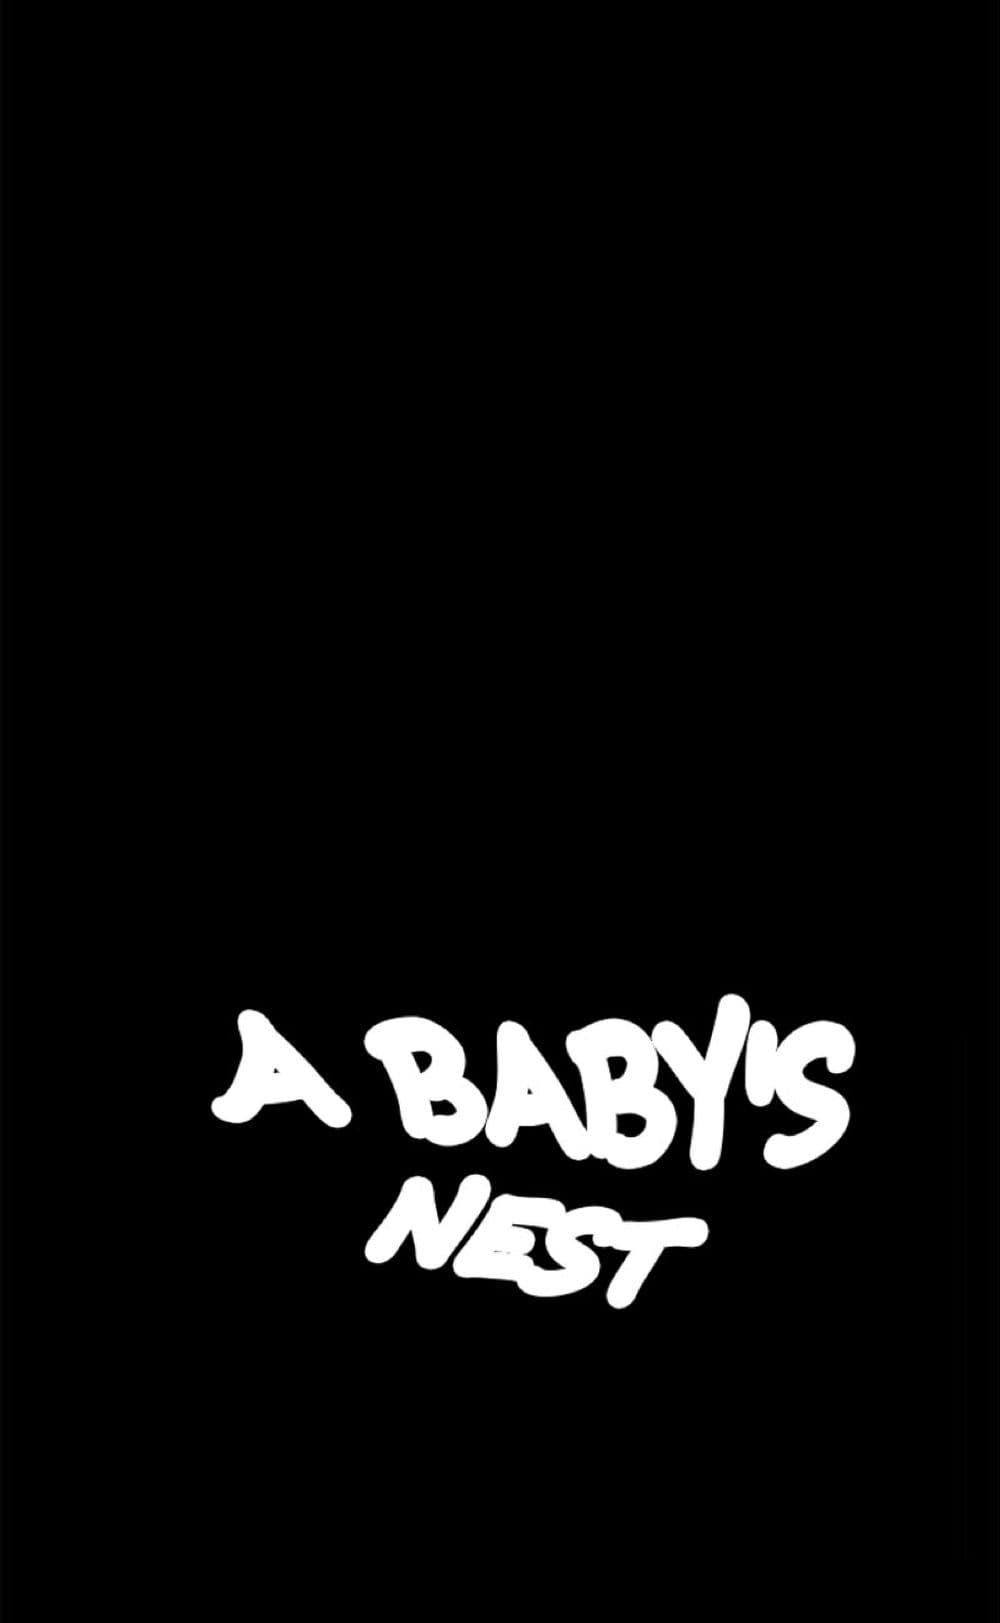 A Baby's Nest 2-2